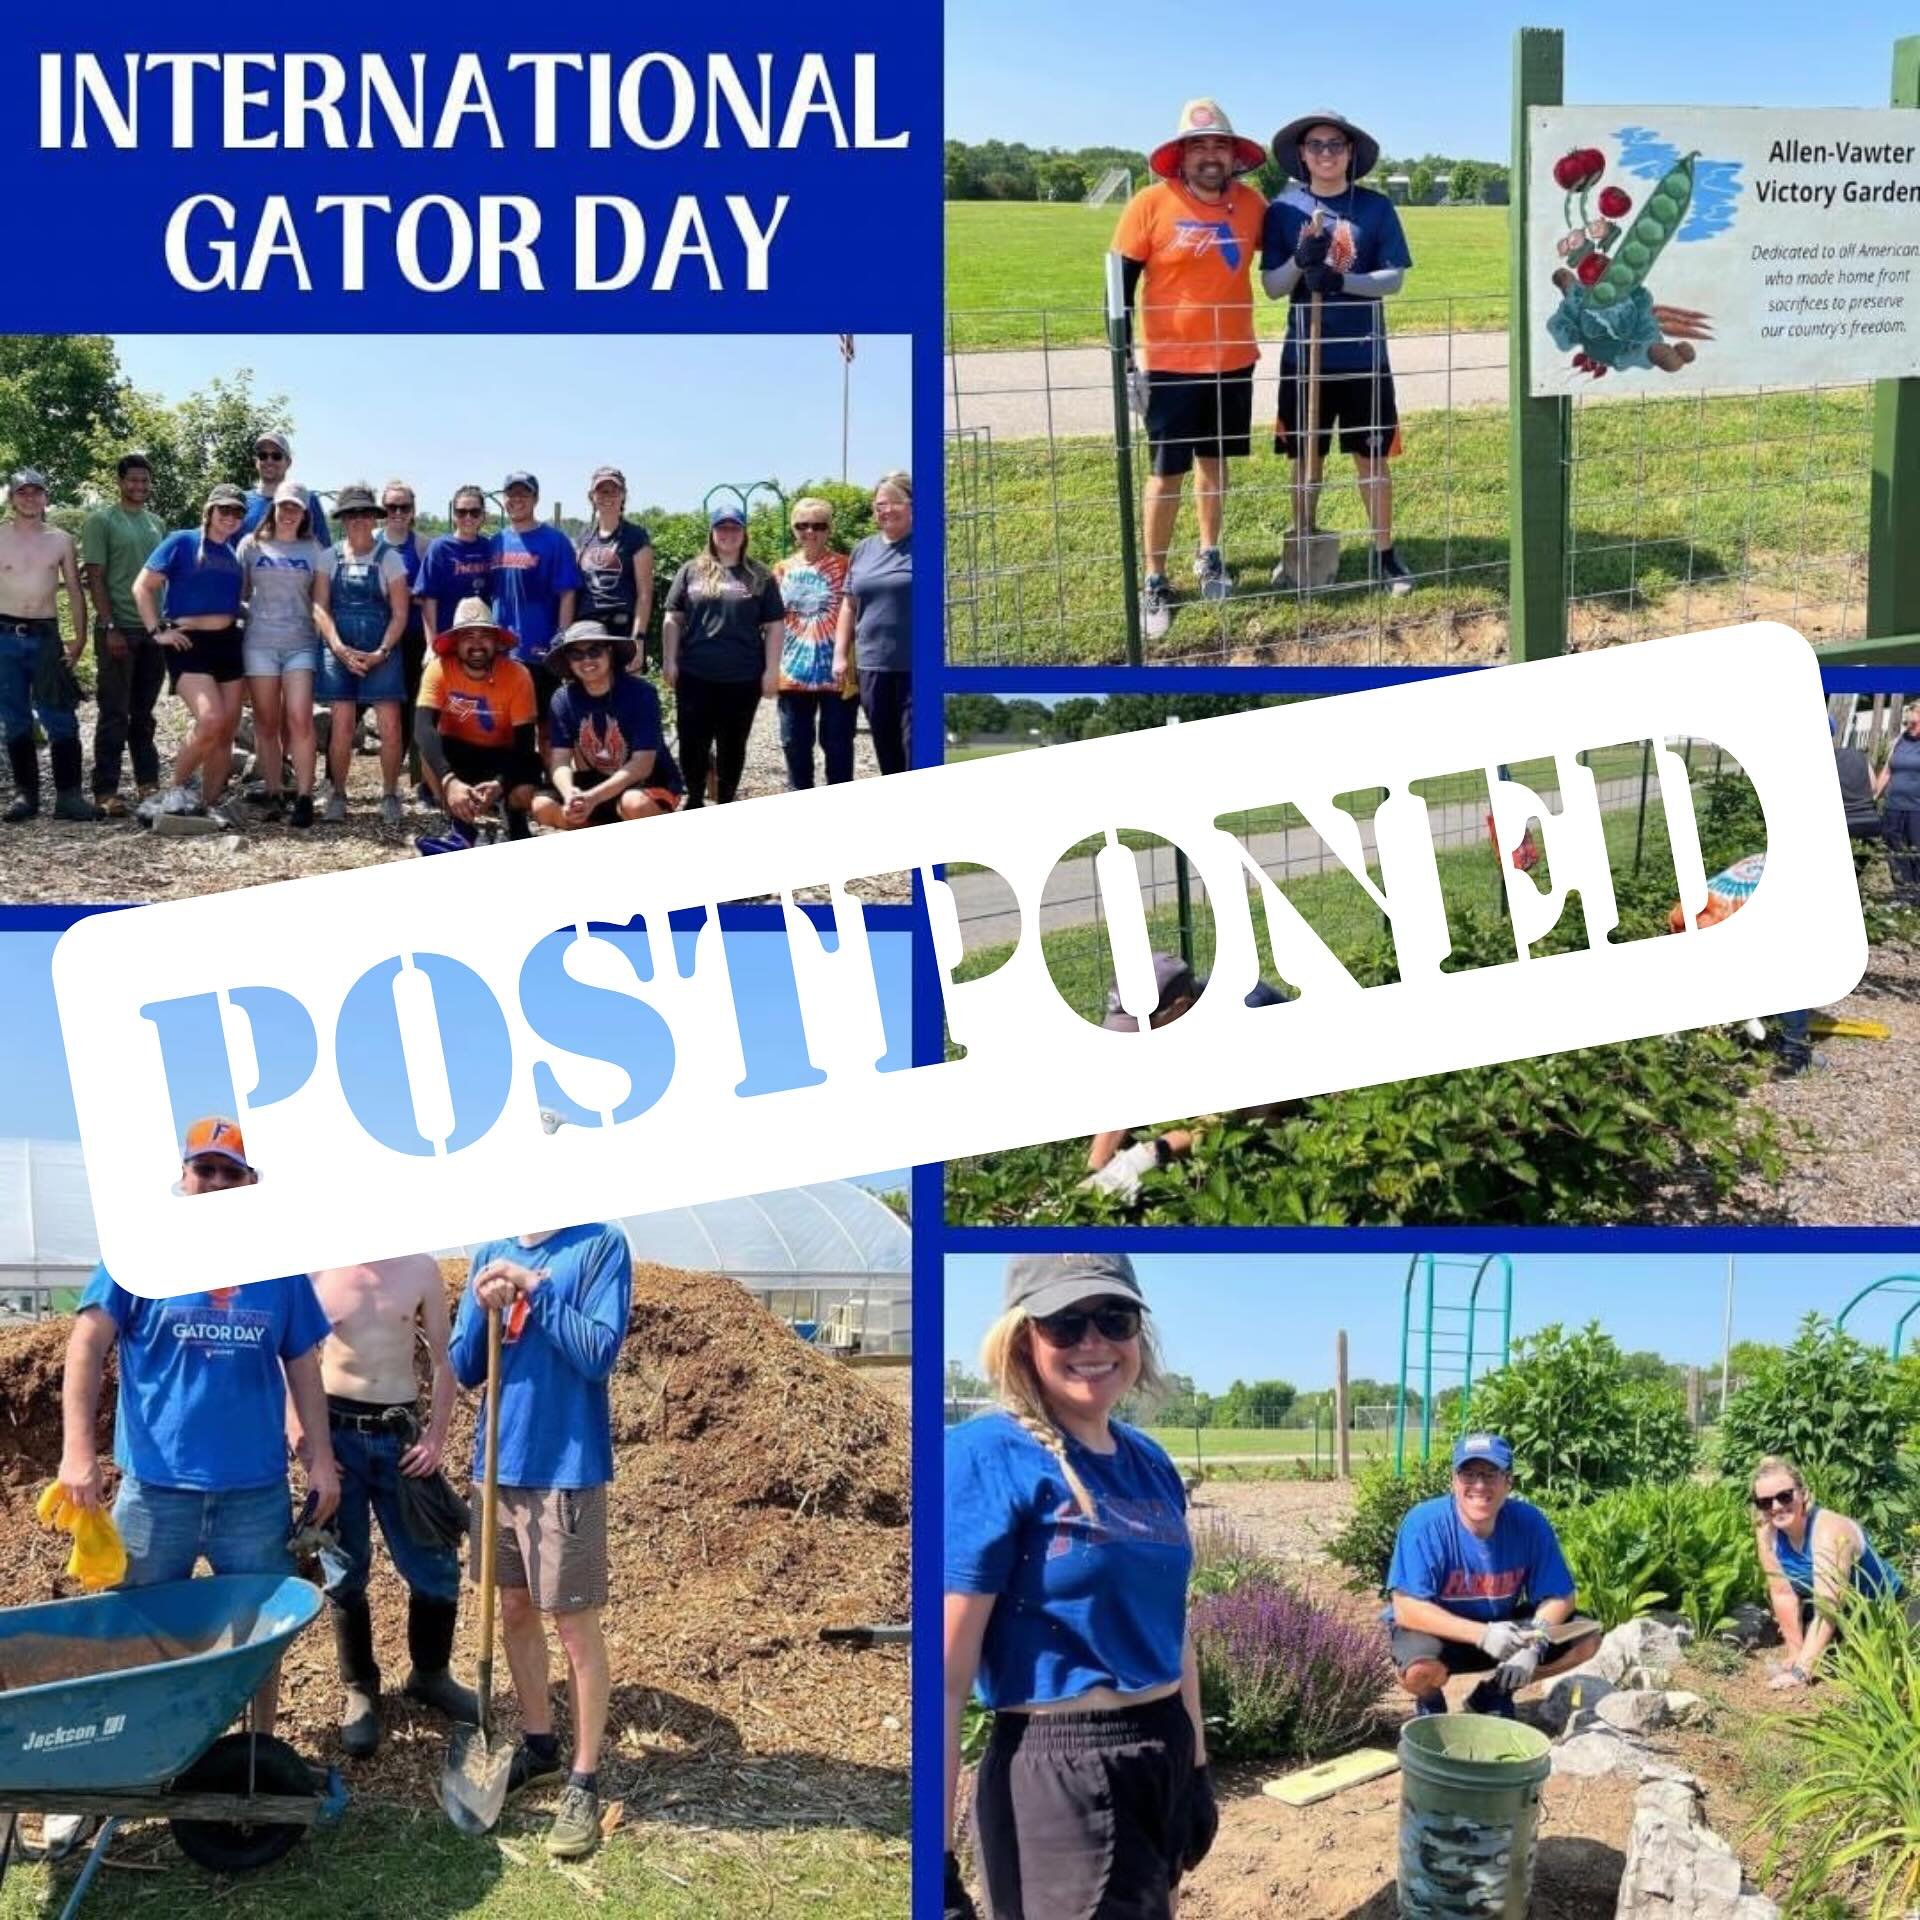 Due to inclement weather, our volunteer morning at Beaman Park for International Gator Day has been postponed. We&rsquo;ll let you know as soon as we have a new date.  Thanks for your flexibility and interest in serving our community. Go Gators!